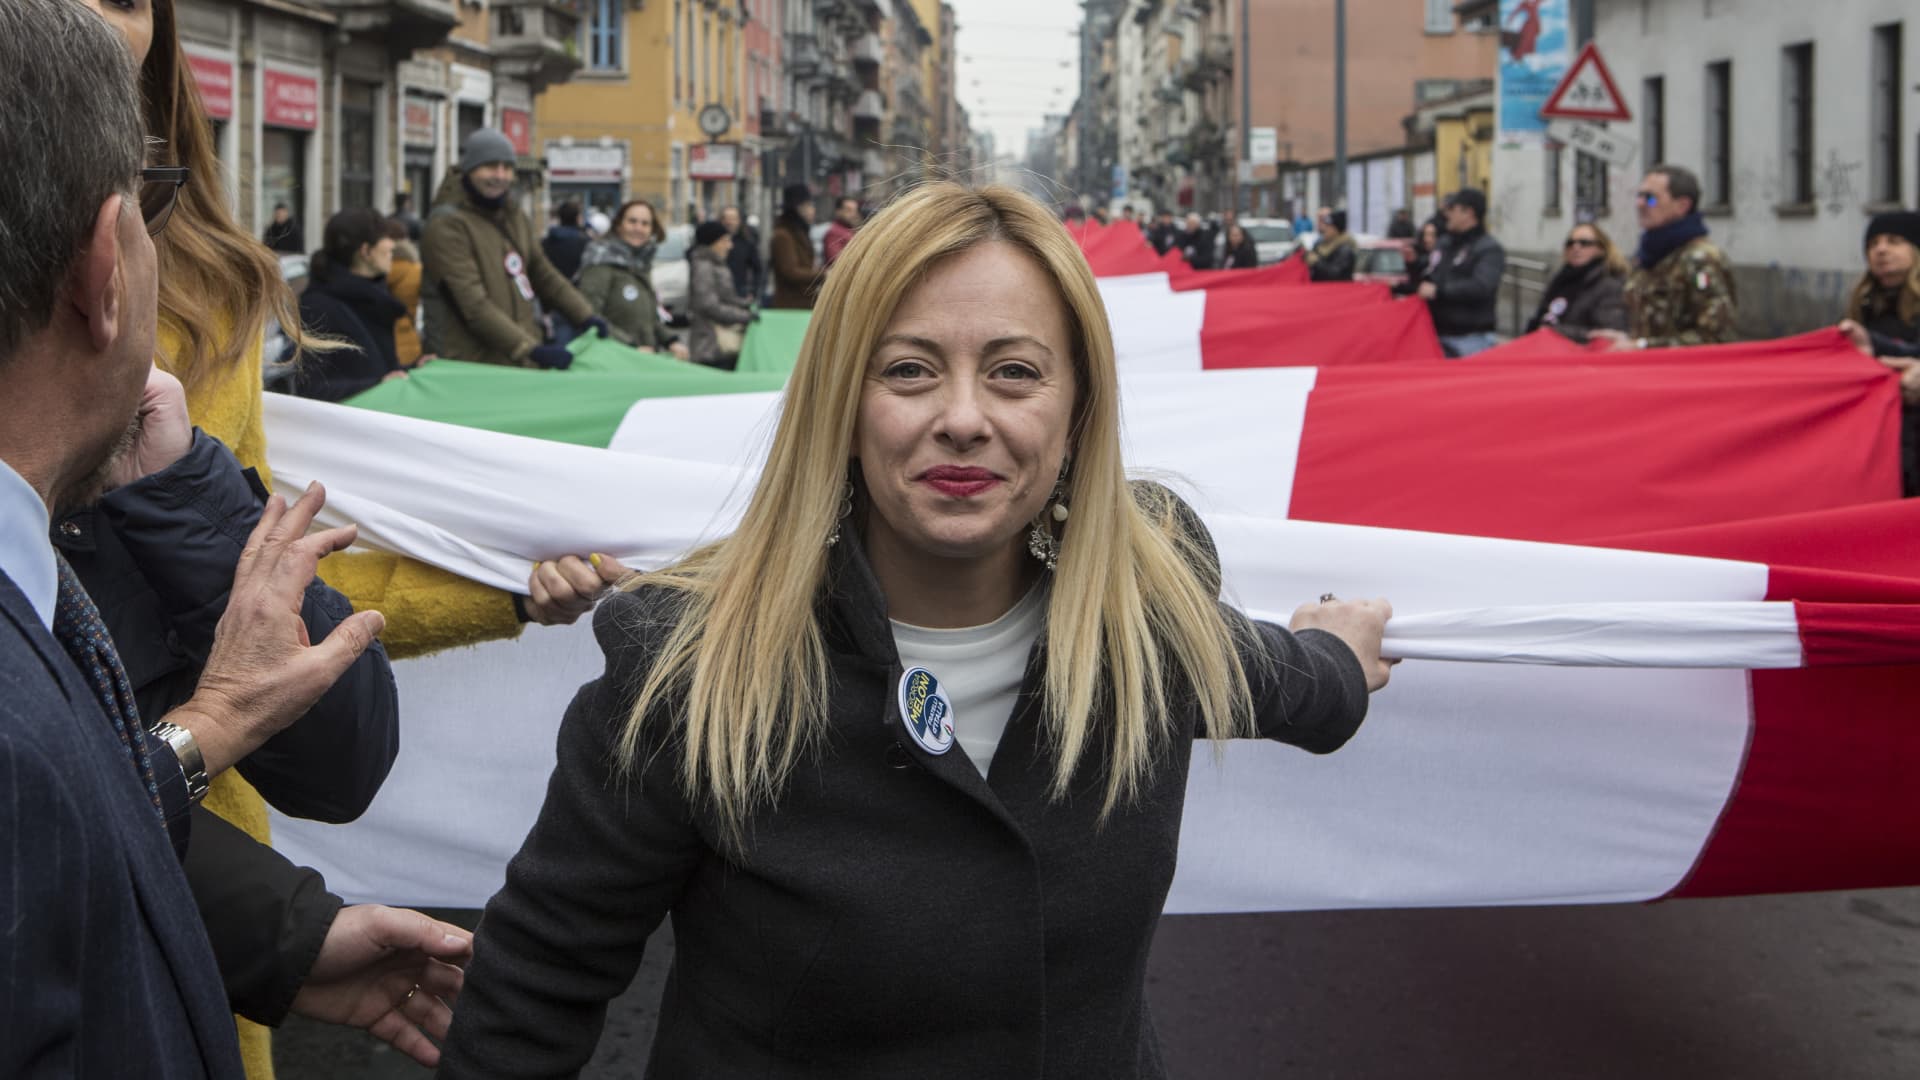 Italy is poised to become a hard-right leader when the country votes in a snap election